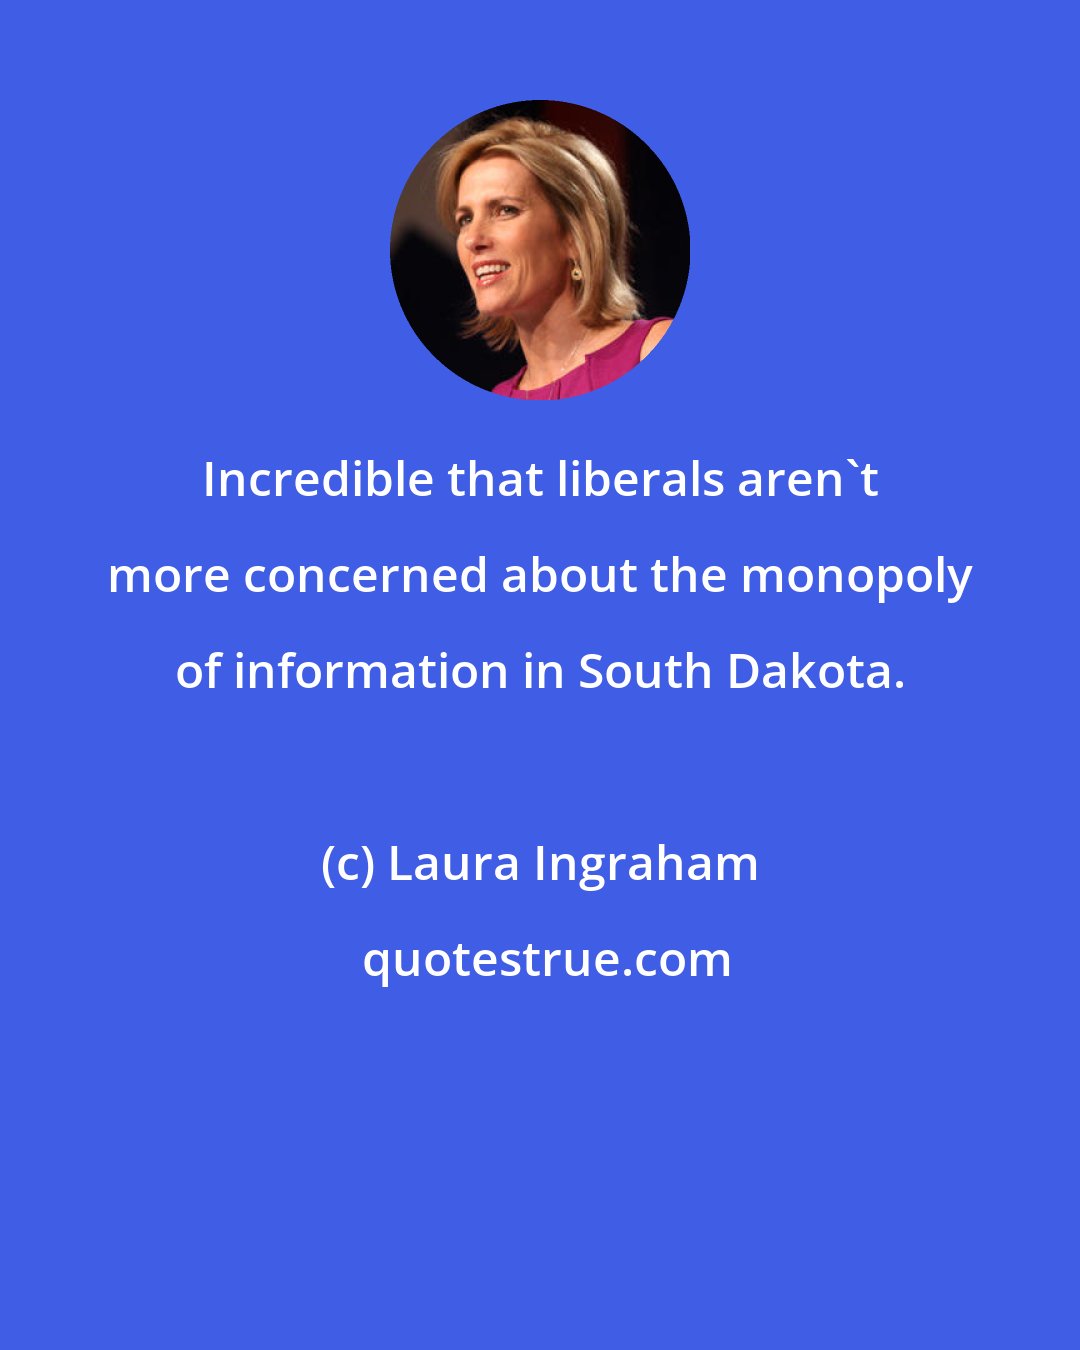 Laura Ingraham: Incredible that liberals aren't more concerned about the monopoly of information in South Dakota.